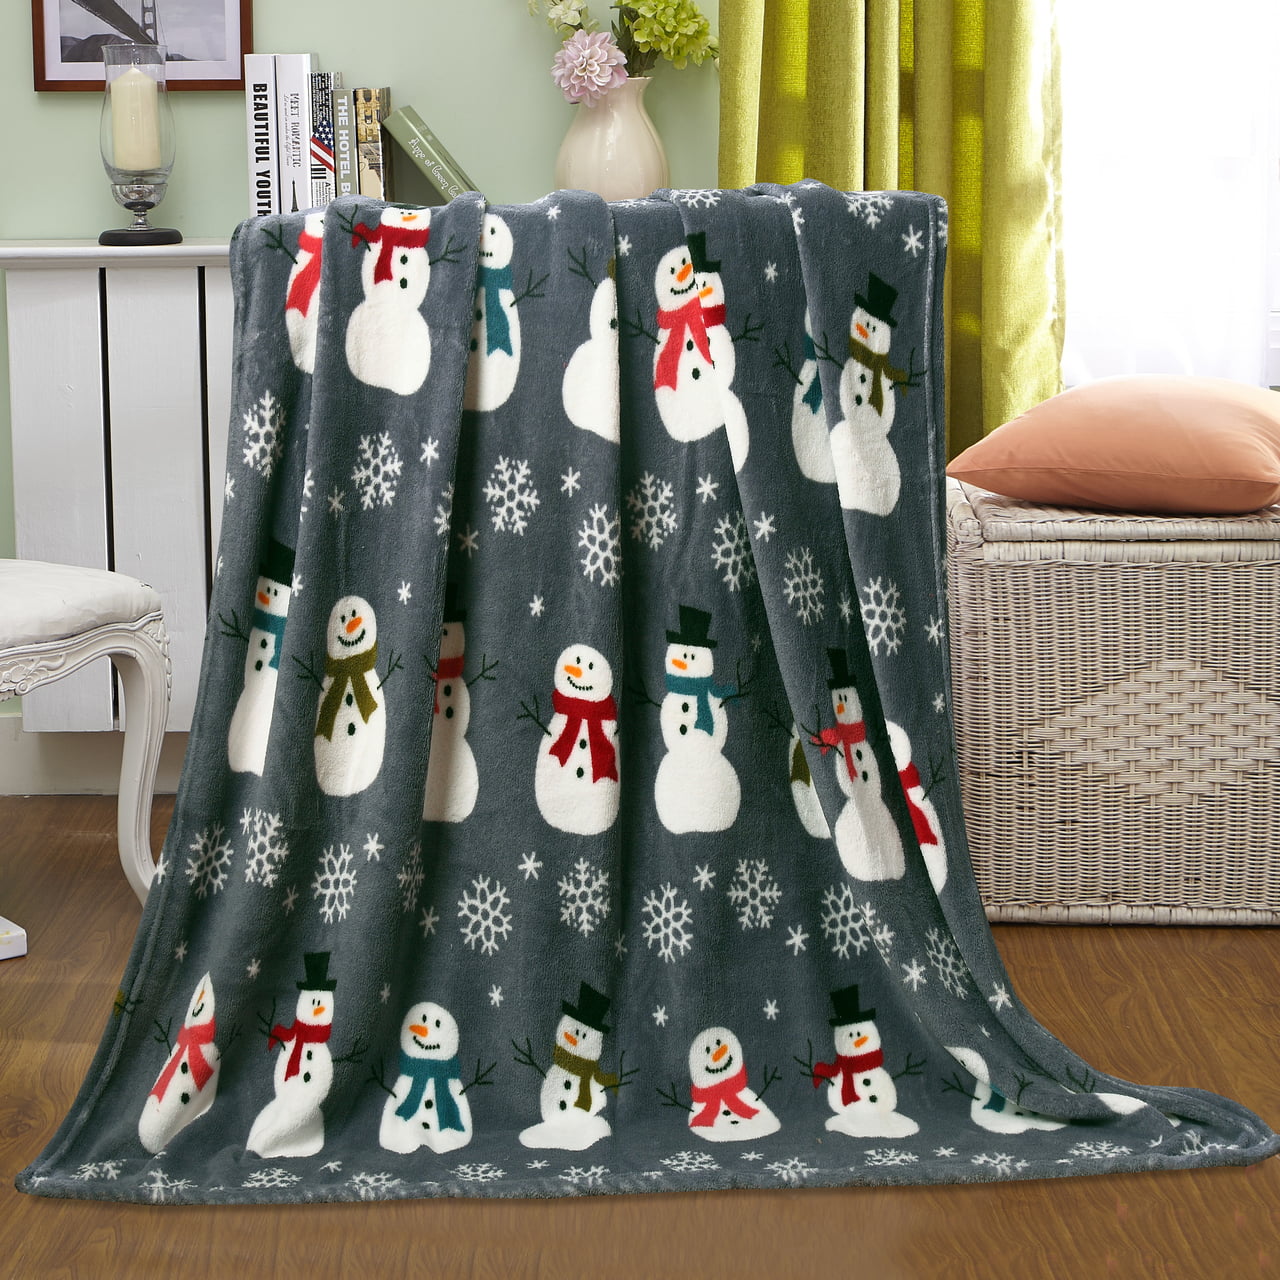 Kiuloam Snowman with Christmas Background Flannel Fleece Throw Blanket 50x60 Living Room/Bedroom/Sofa Couch Warm Soft Bed Blanket for Kids Adults All Season 